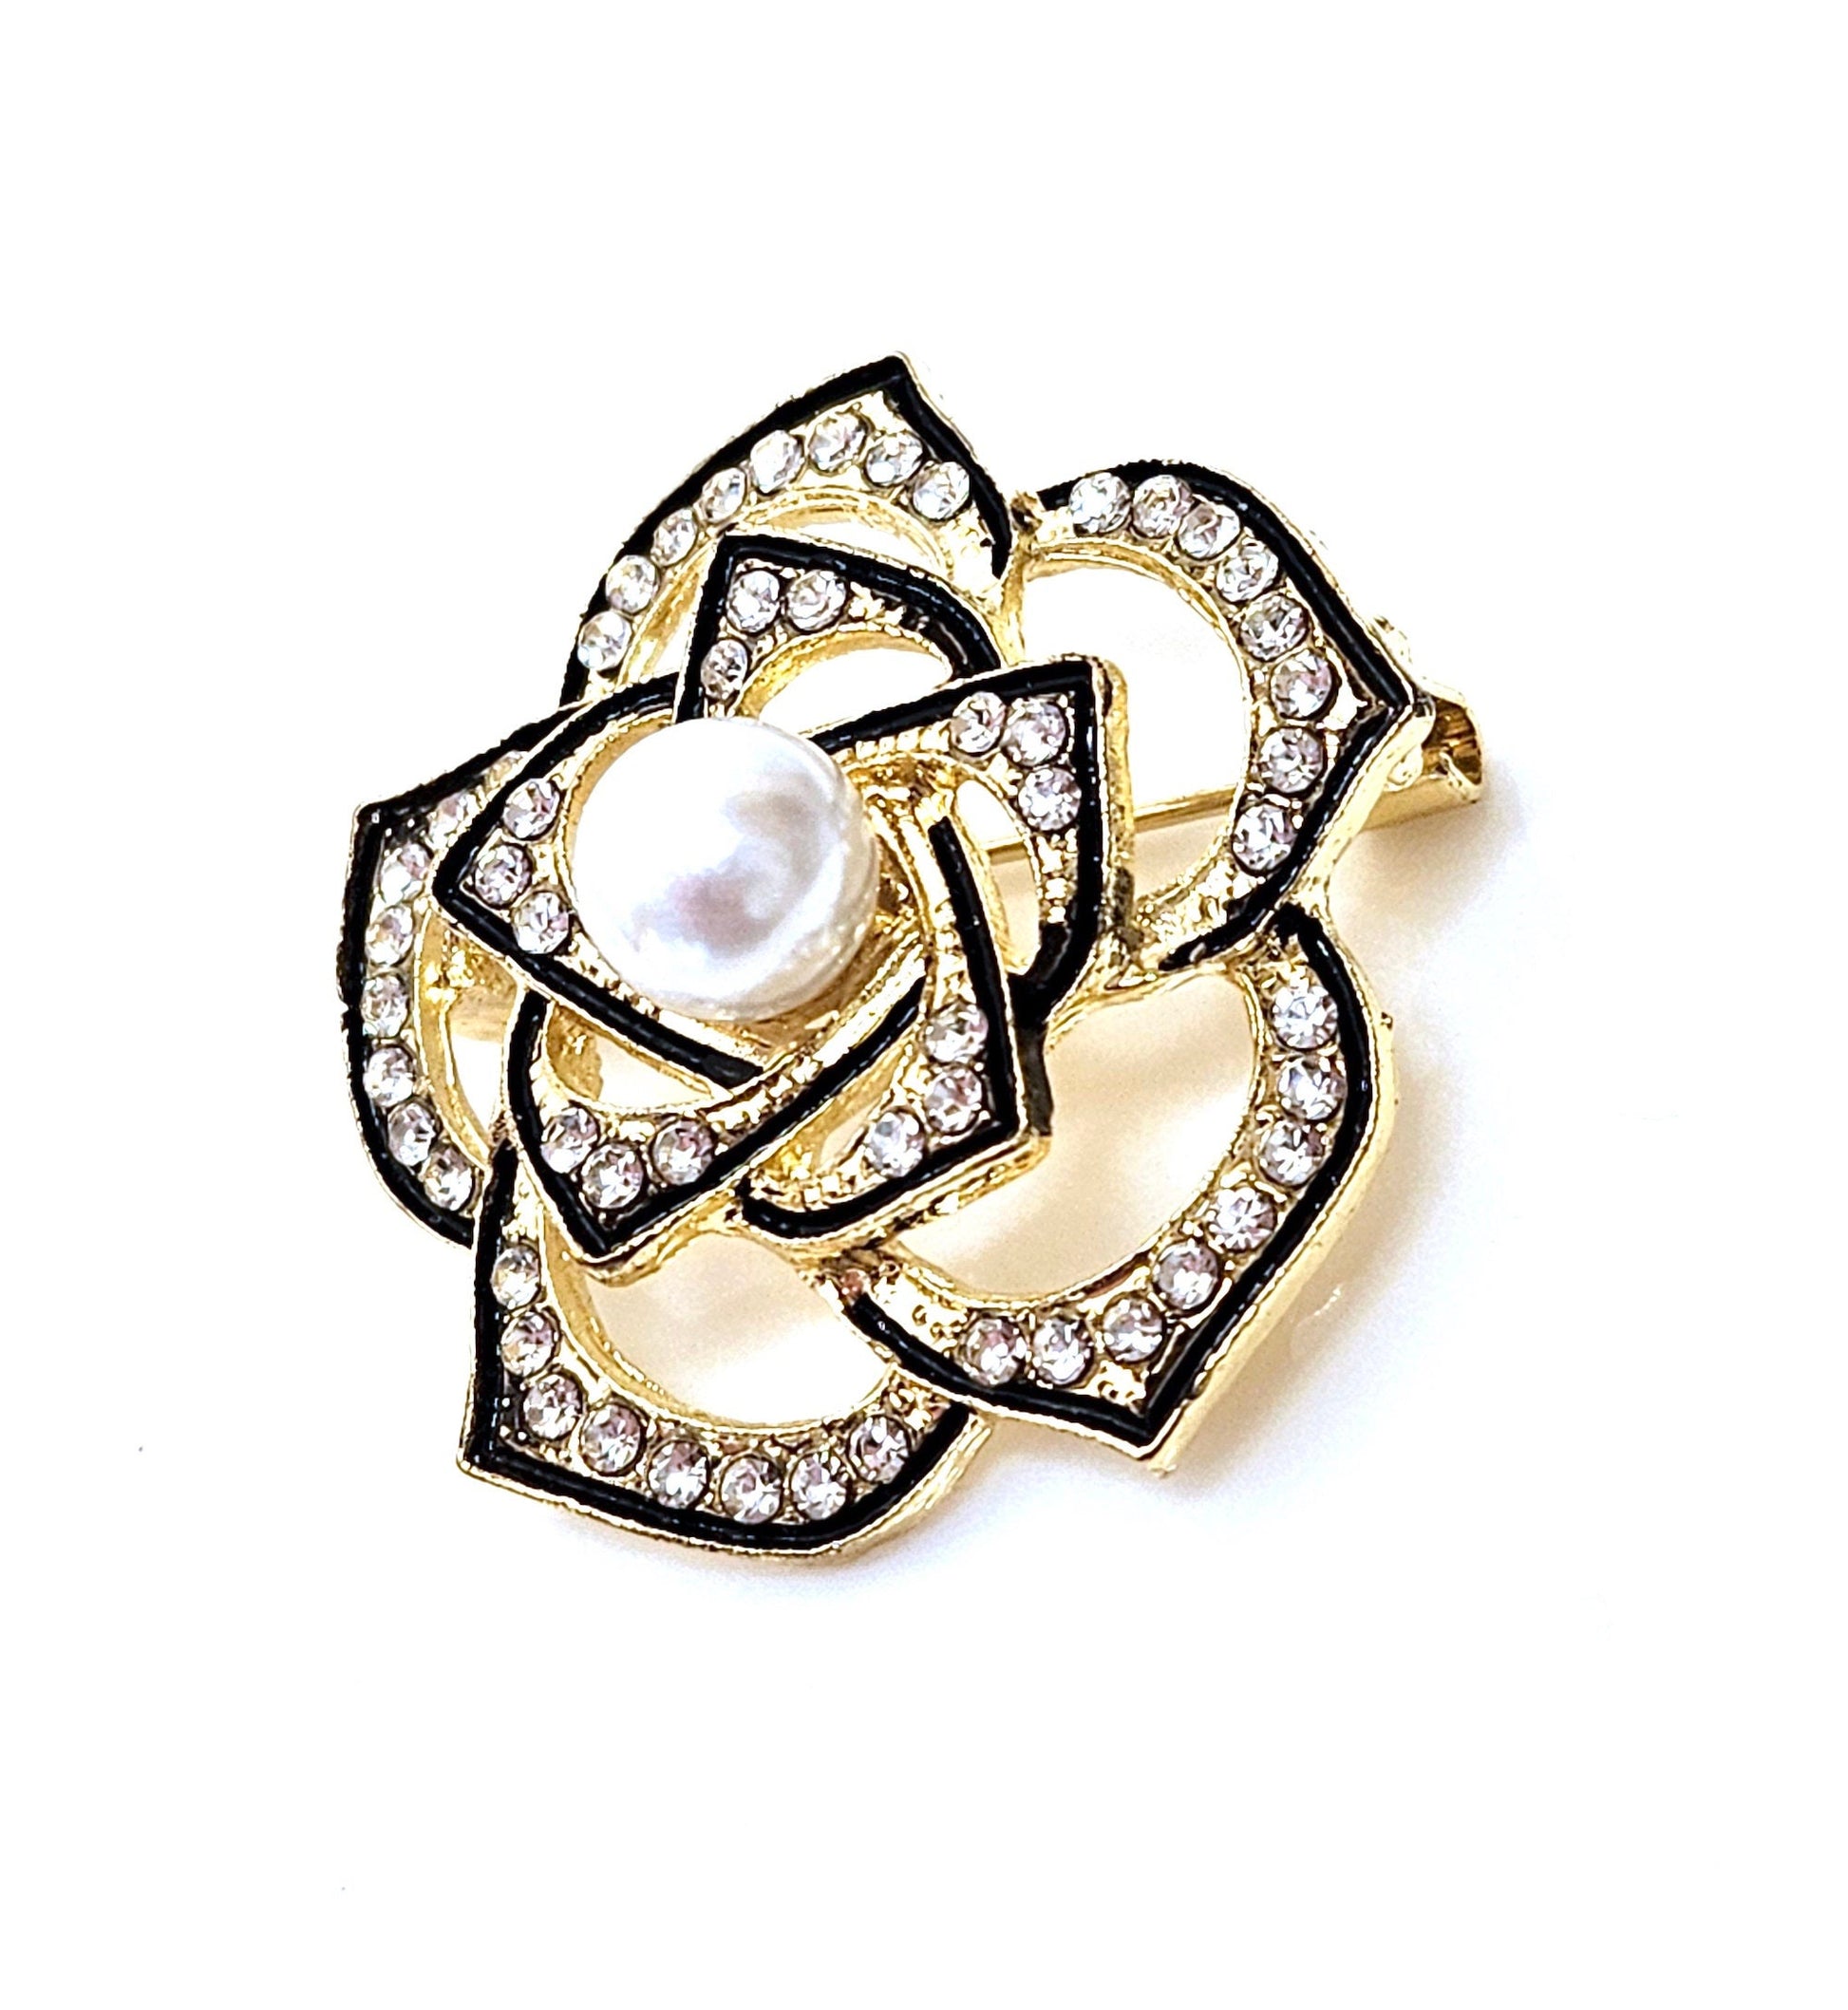 Sparkly Crystal Pearl Camelia Brooch, Crystal Flower Pin, Statement Brooch, Very Sparkly Jacket Pin, Brooches For Women